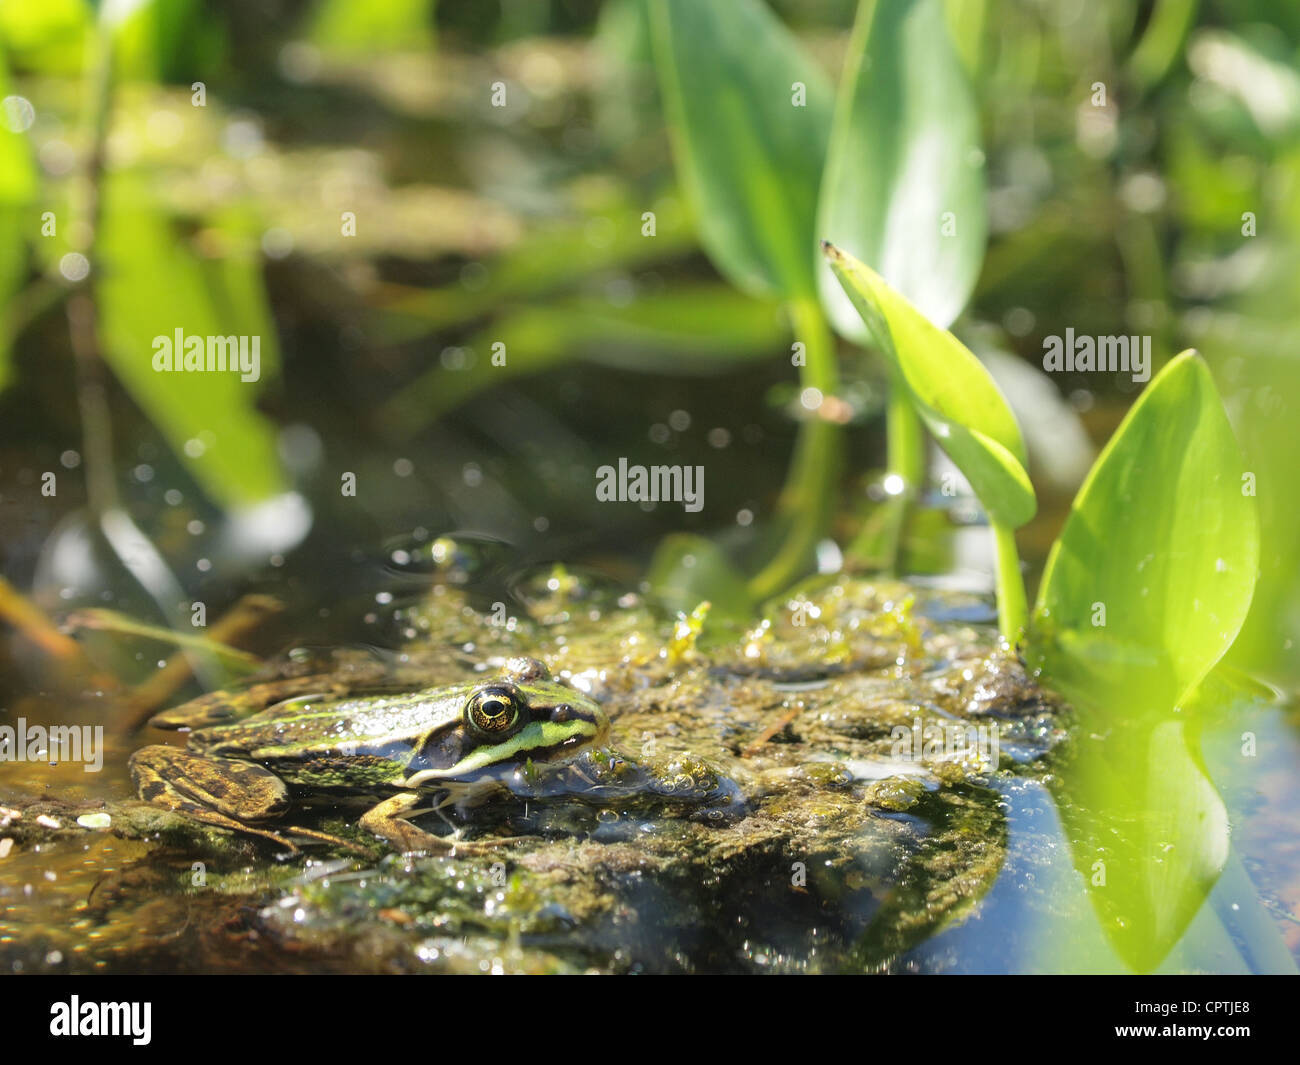 Green frog sitting in the water of a pond pelophylax ridibundus Stock Photo